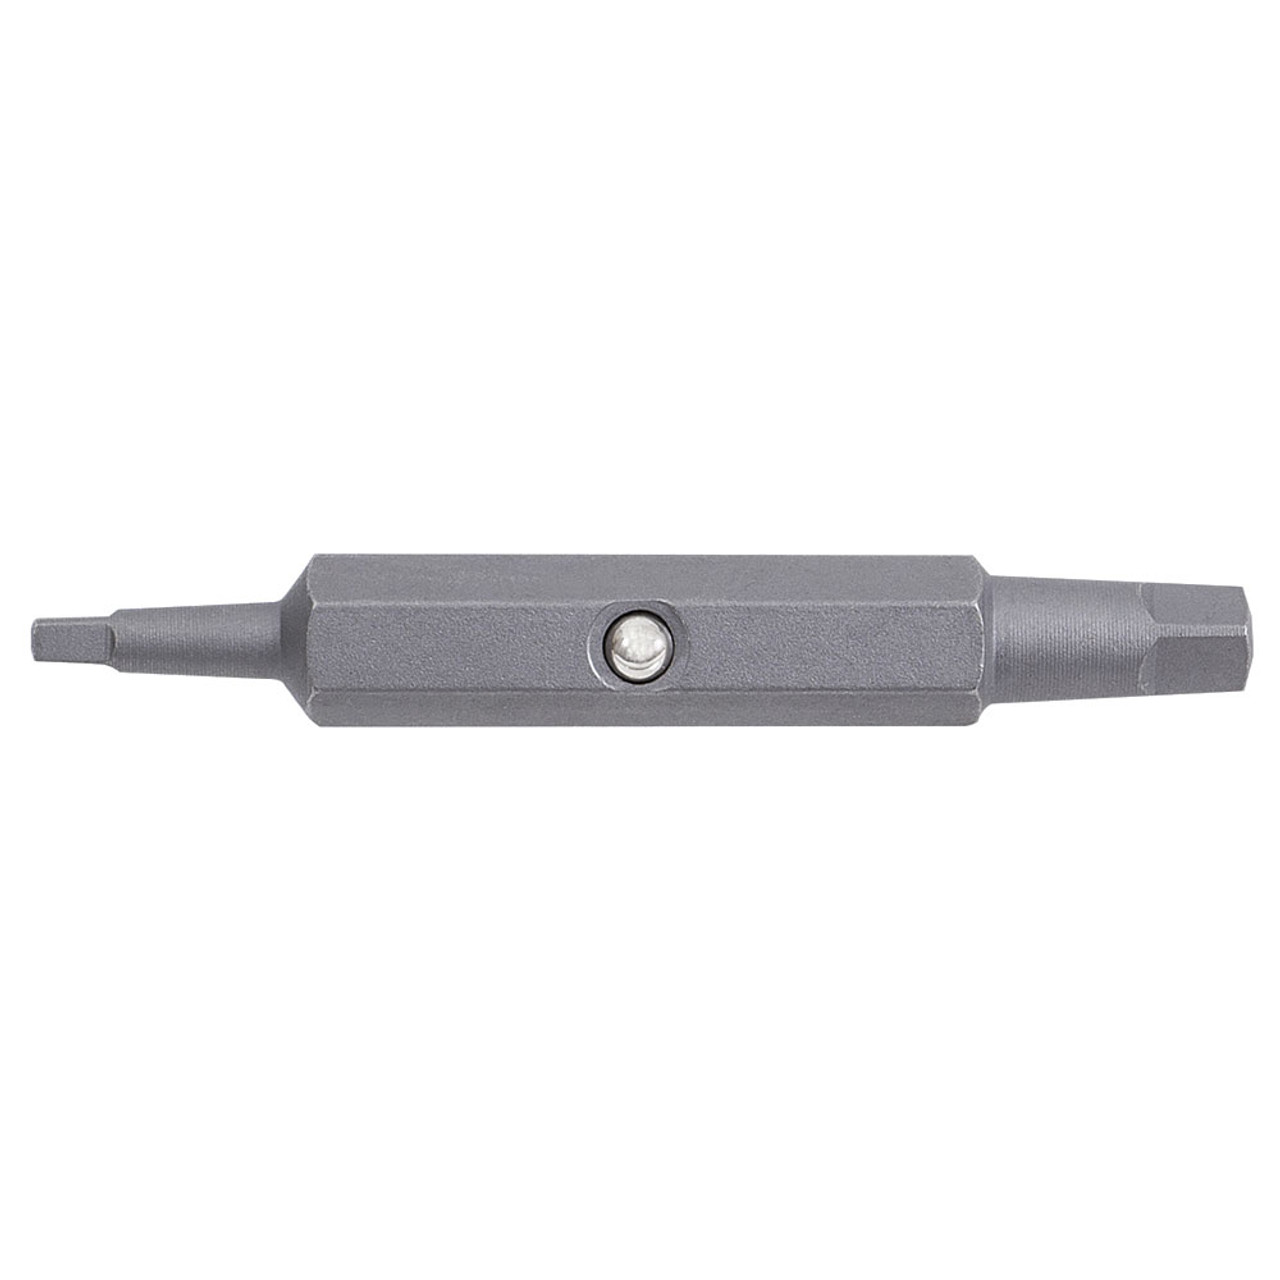 Robertson S0 & S3 Replacement Bit For 15-in-1 Multi-Bit Screwdriver (fits H3400)  H3400K